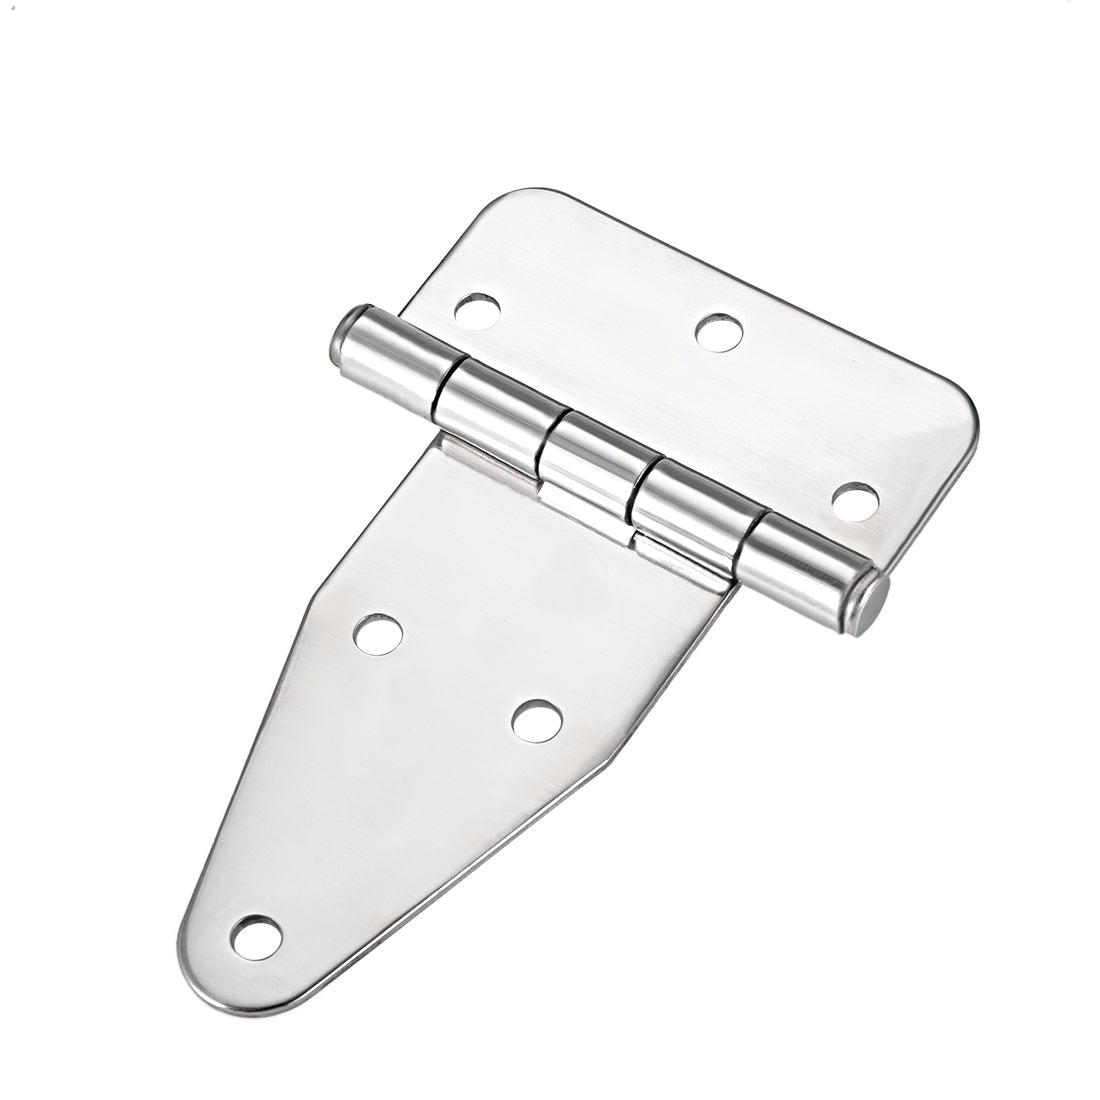 uxcell Uxcell T-Strap Heavy Shed Hinge Gate Door Hinges 304 Stainless Steel, 137mm Overall Length